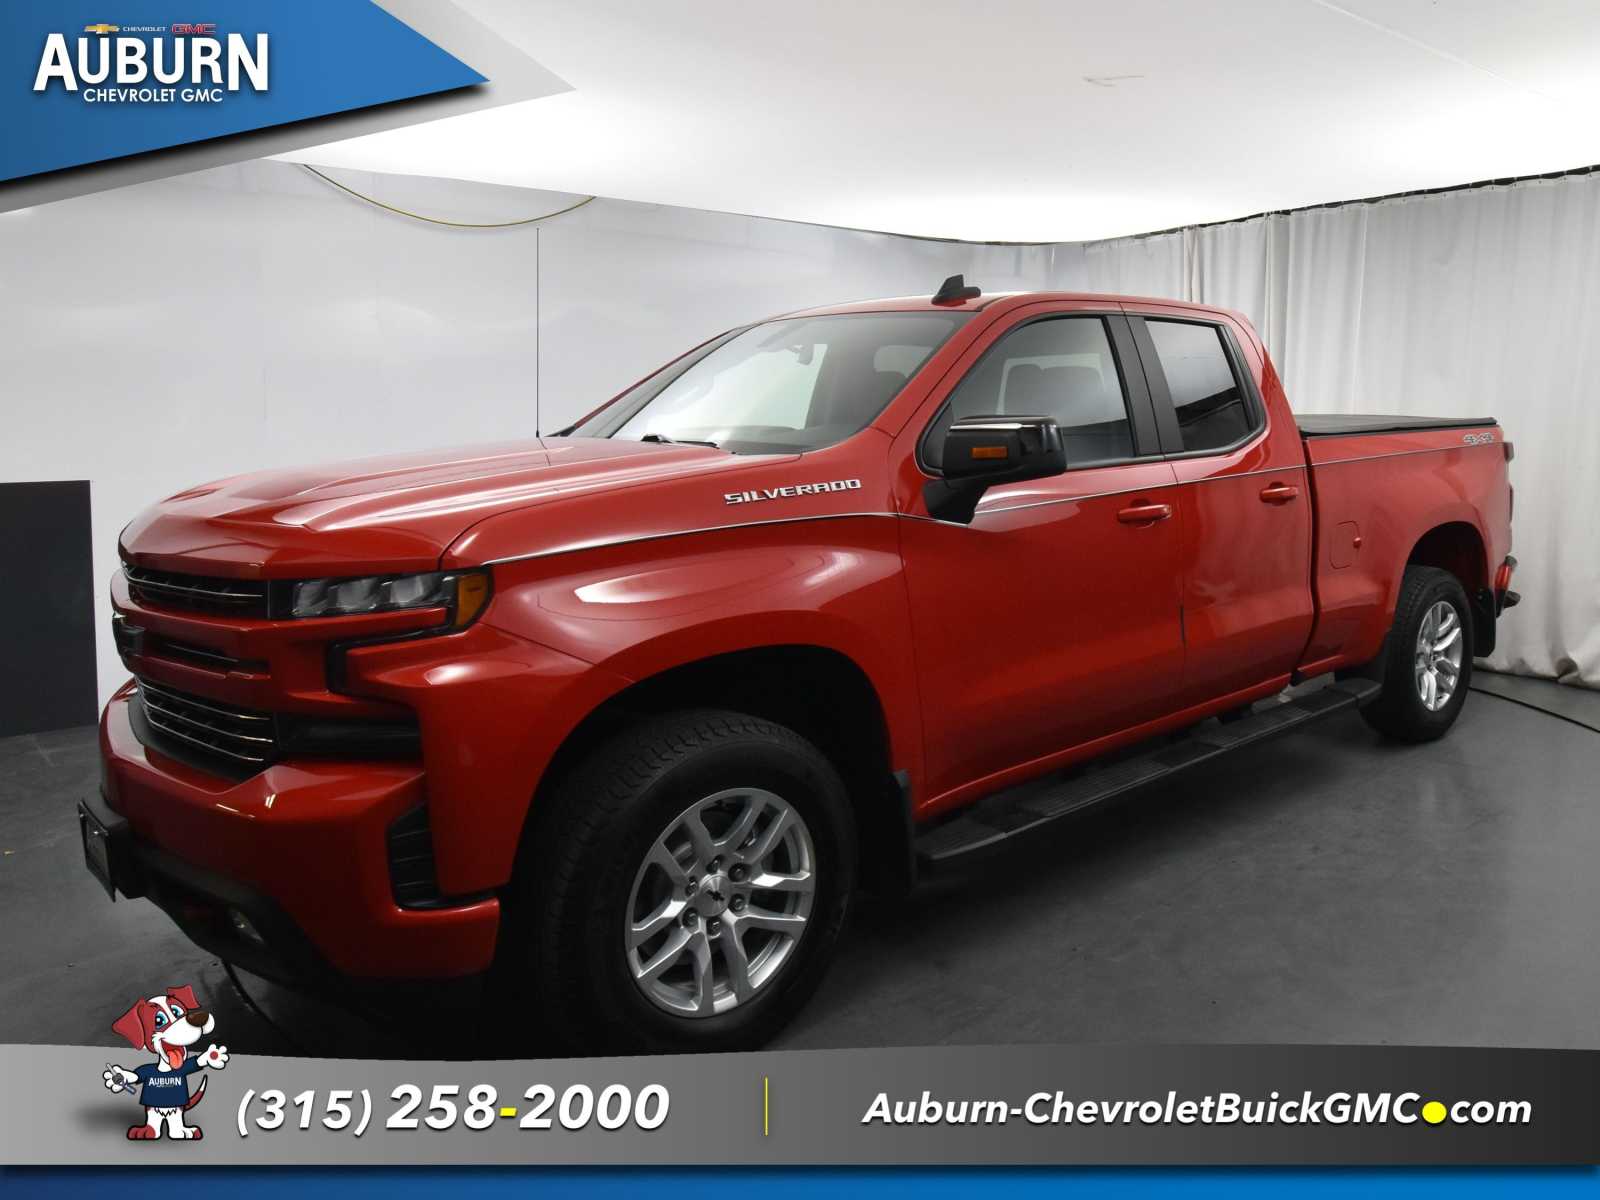 Used 2021 Chevrolet Silverado 1500 RST with VIN 1GCRYEED4MZ100483 for sale in Auburn, NY